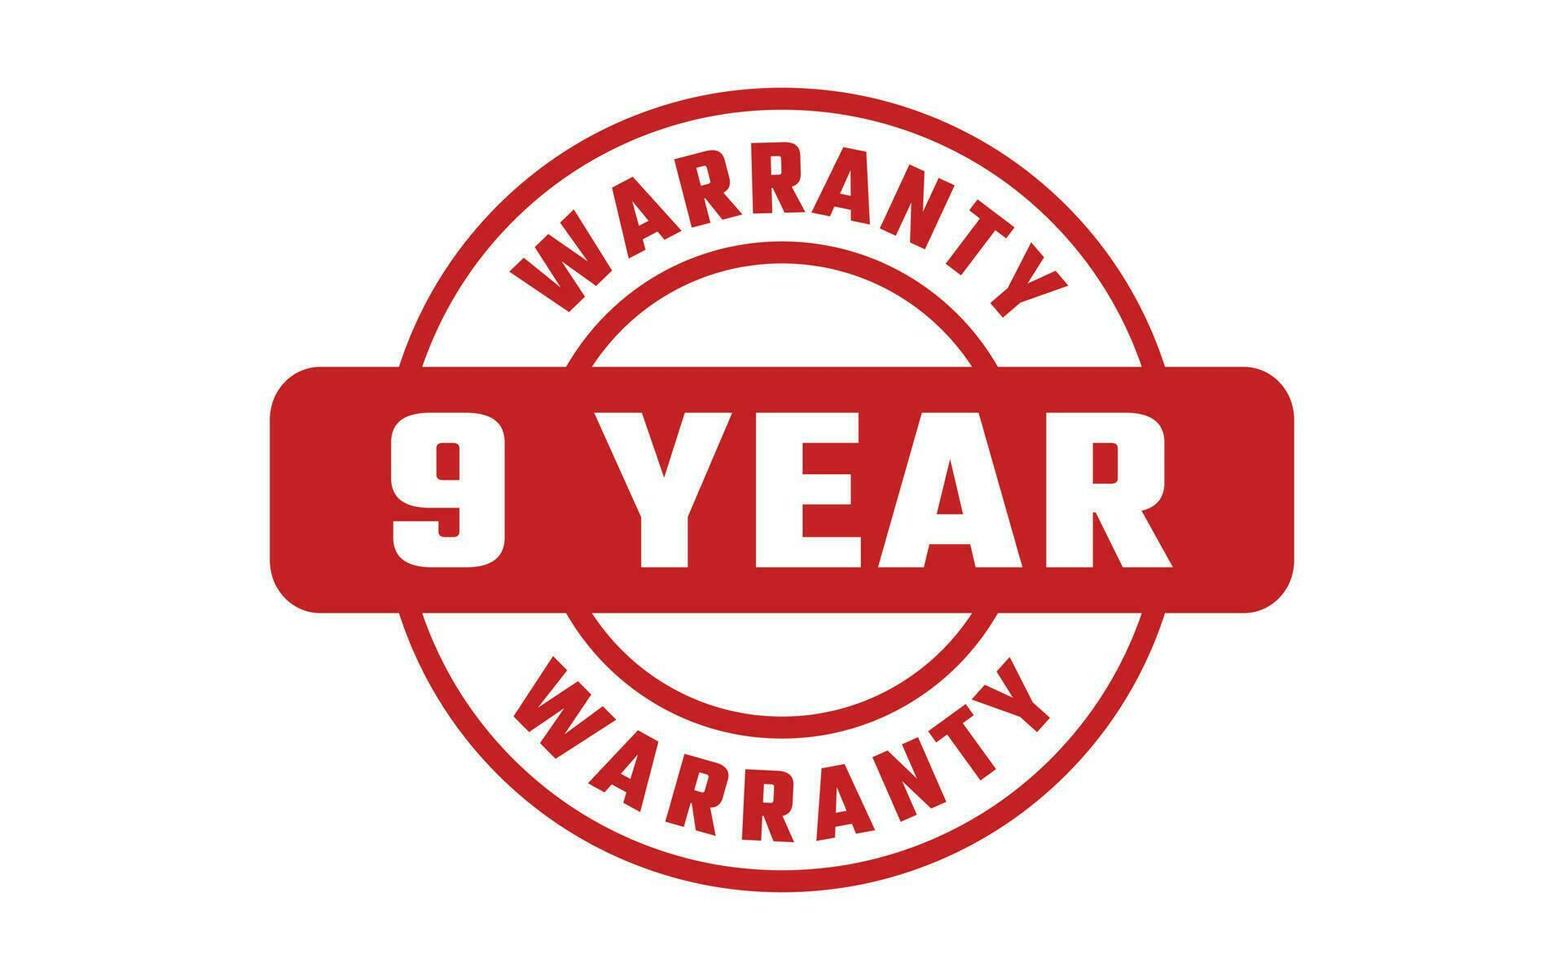 9 Year Warranty Rubber Stamp vector